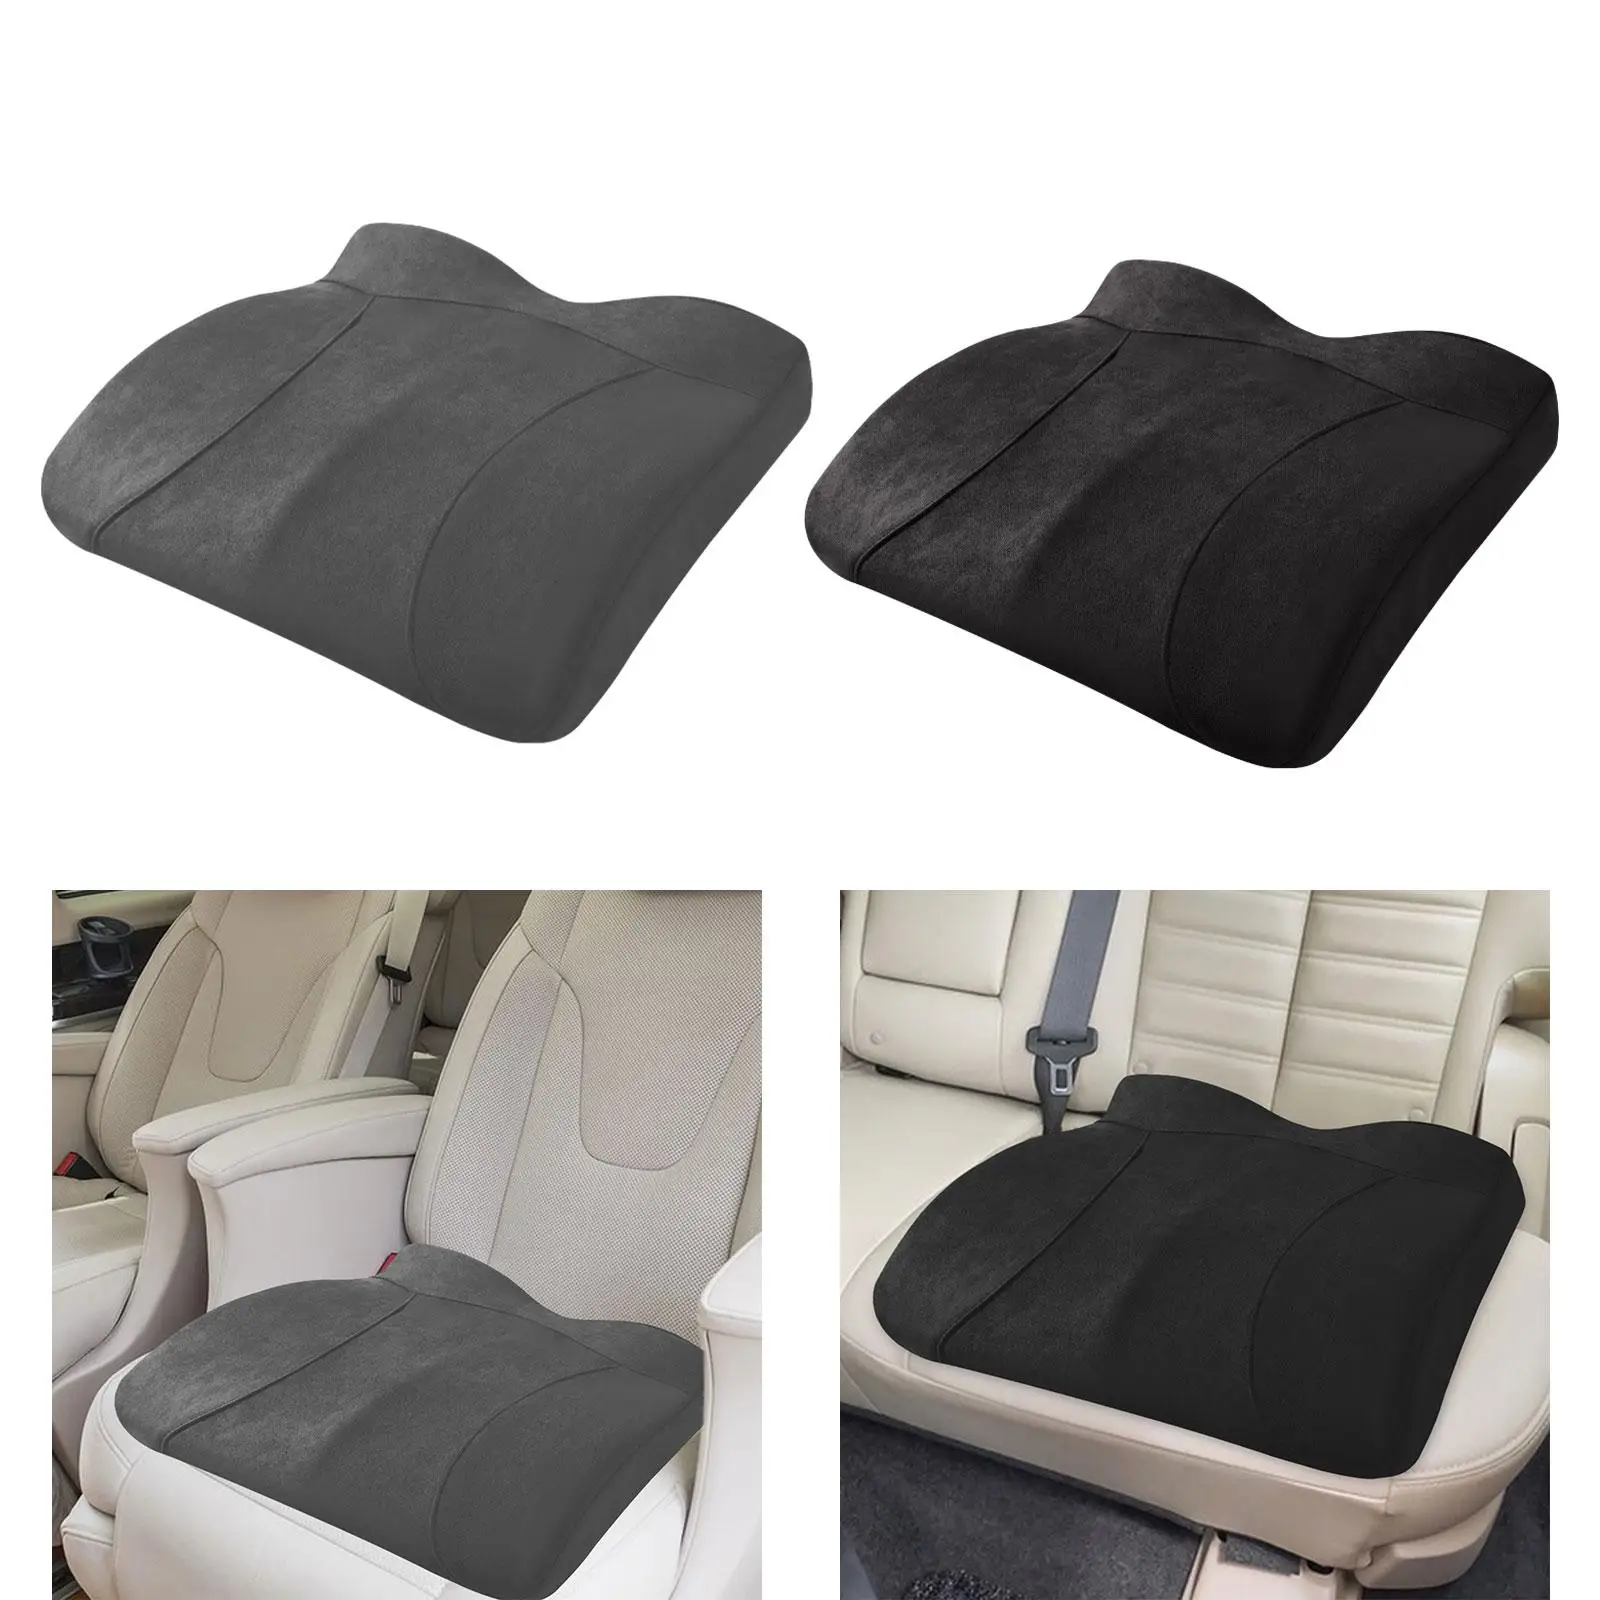 Car Seat Cushion Pad Memory Foam Non Slip Car Driver Seat Car Seat Covers Auto Seat Pad Protective Mat Office/Home Chair Seat